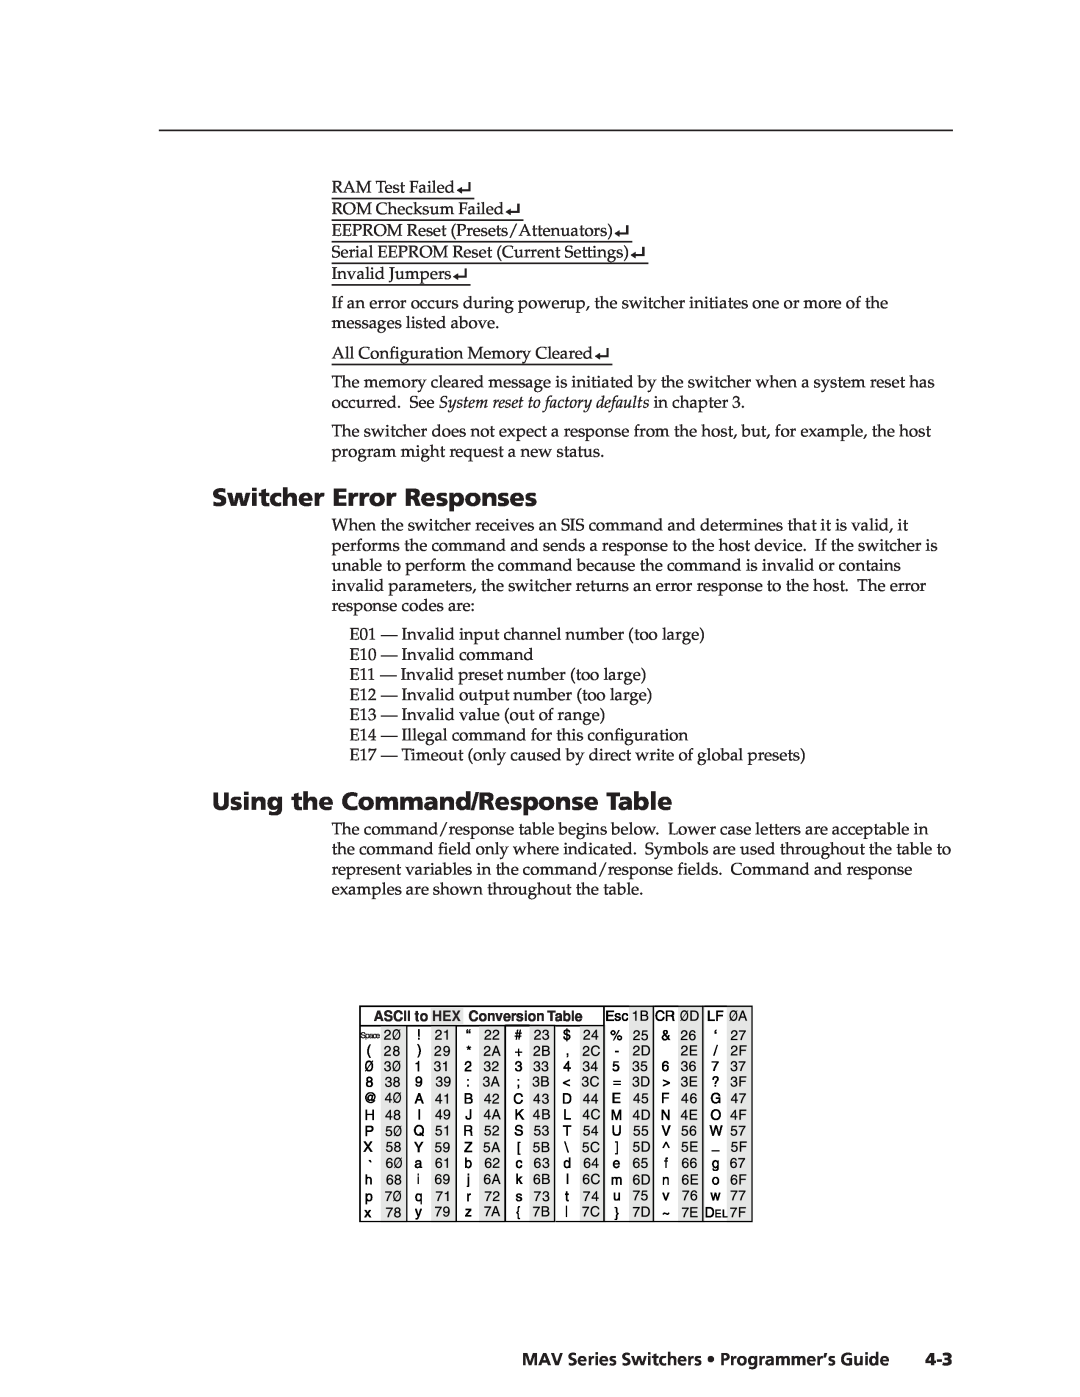 Extron electronic Switcher Error Responses, Using the Command/Response Table, MAV Series Switchers Programmer’s Guide 